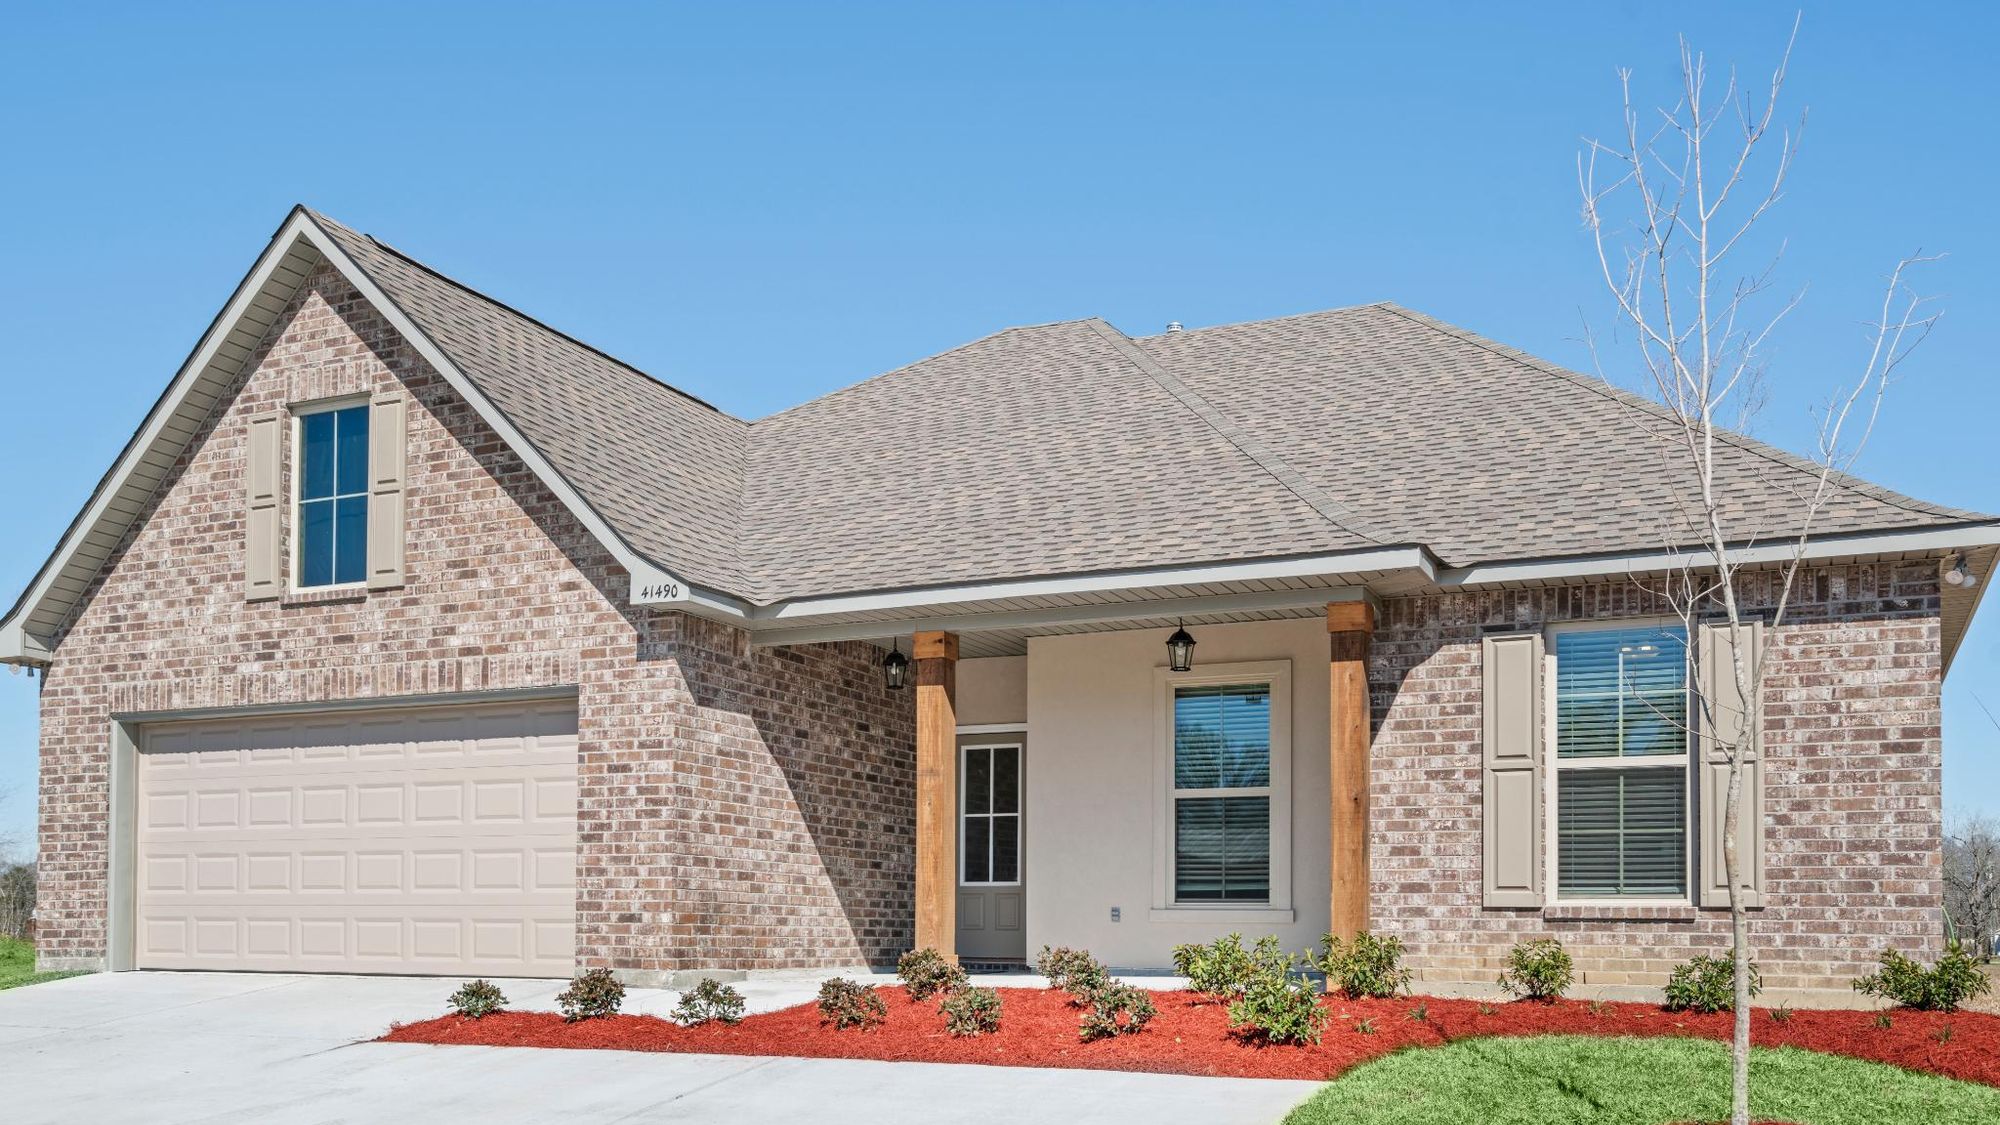 new homes in prarieville, la in cottages at savannah row